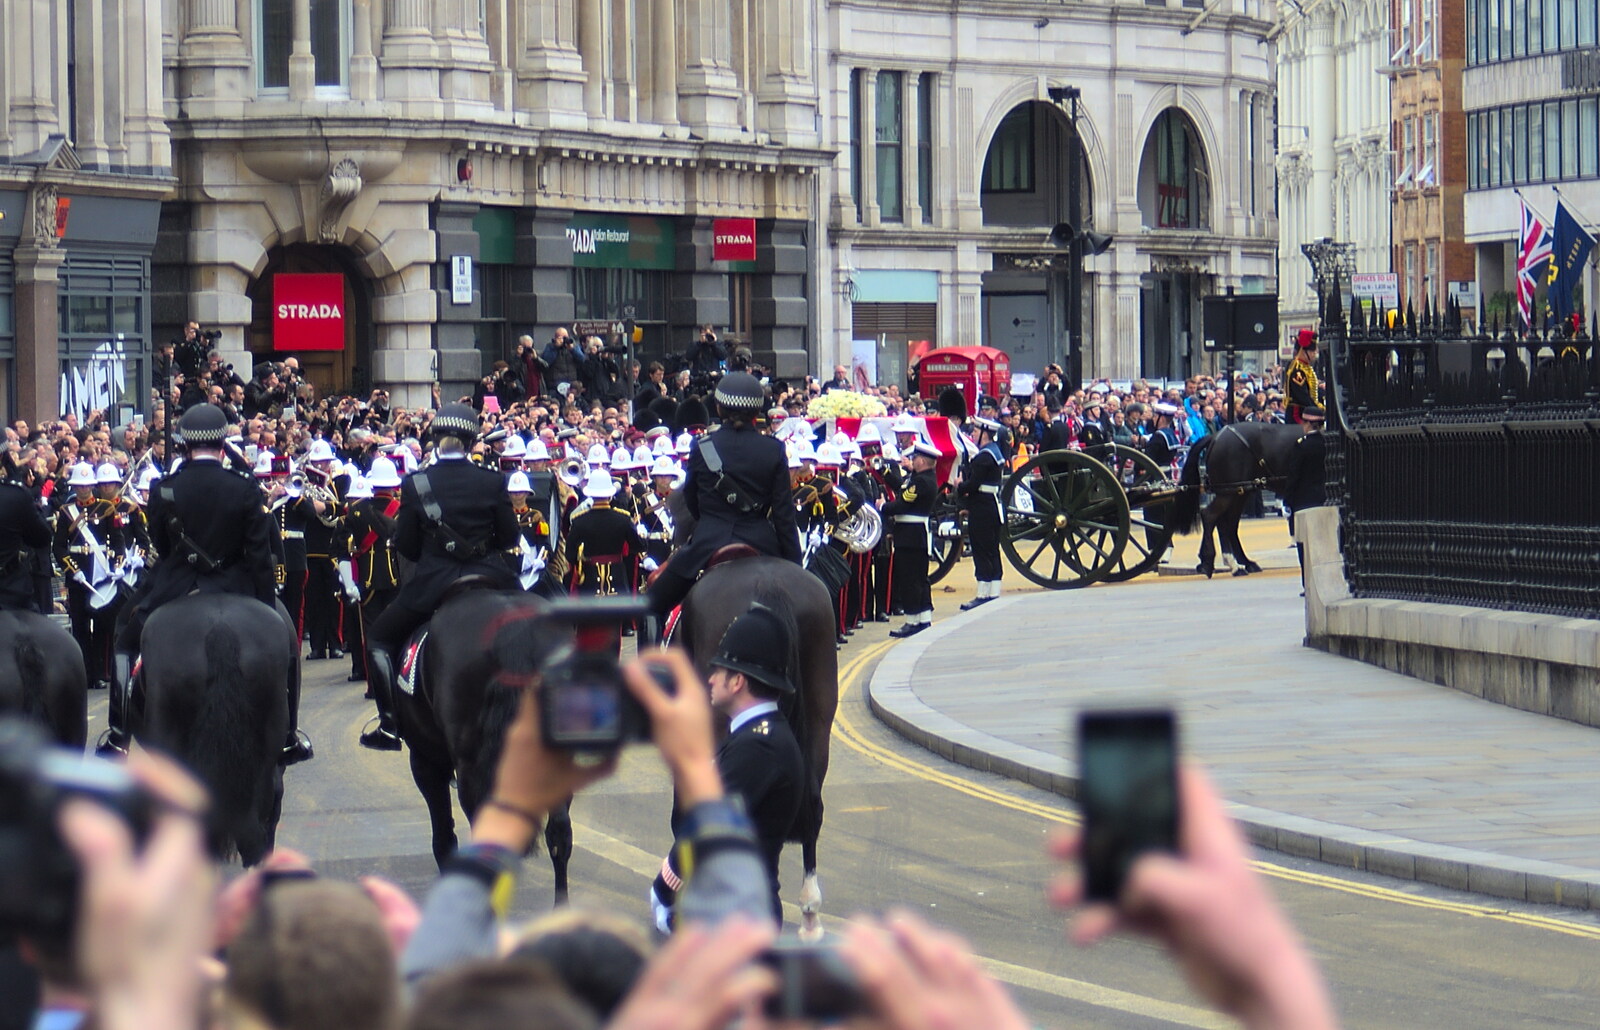 The gun carriage and coffin heads up to St. Paul's from Margaret Thatcher's Funeral, St. Paul's, London - 17th April 2013